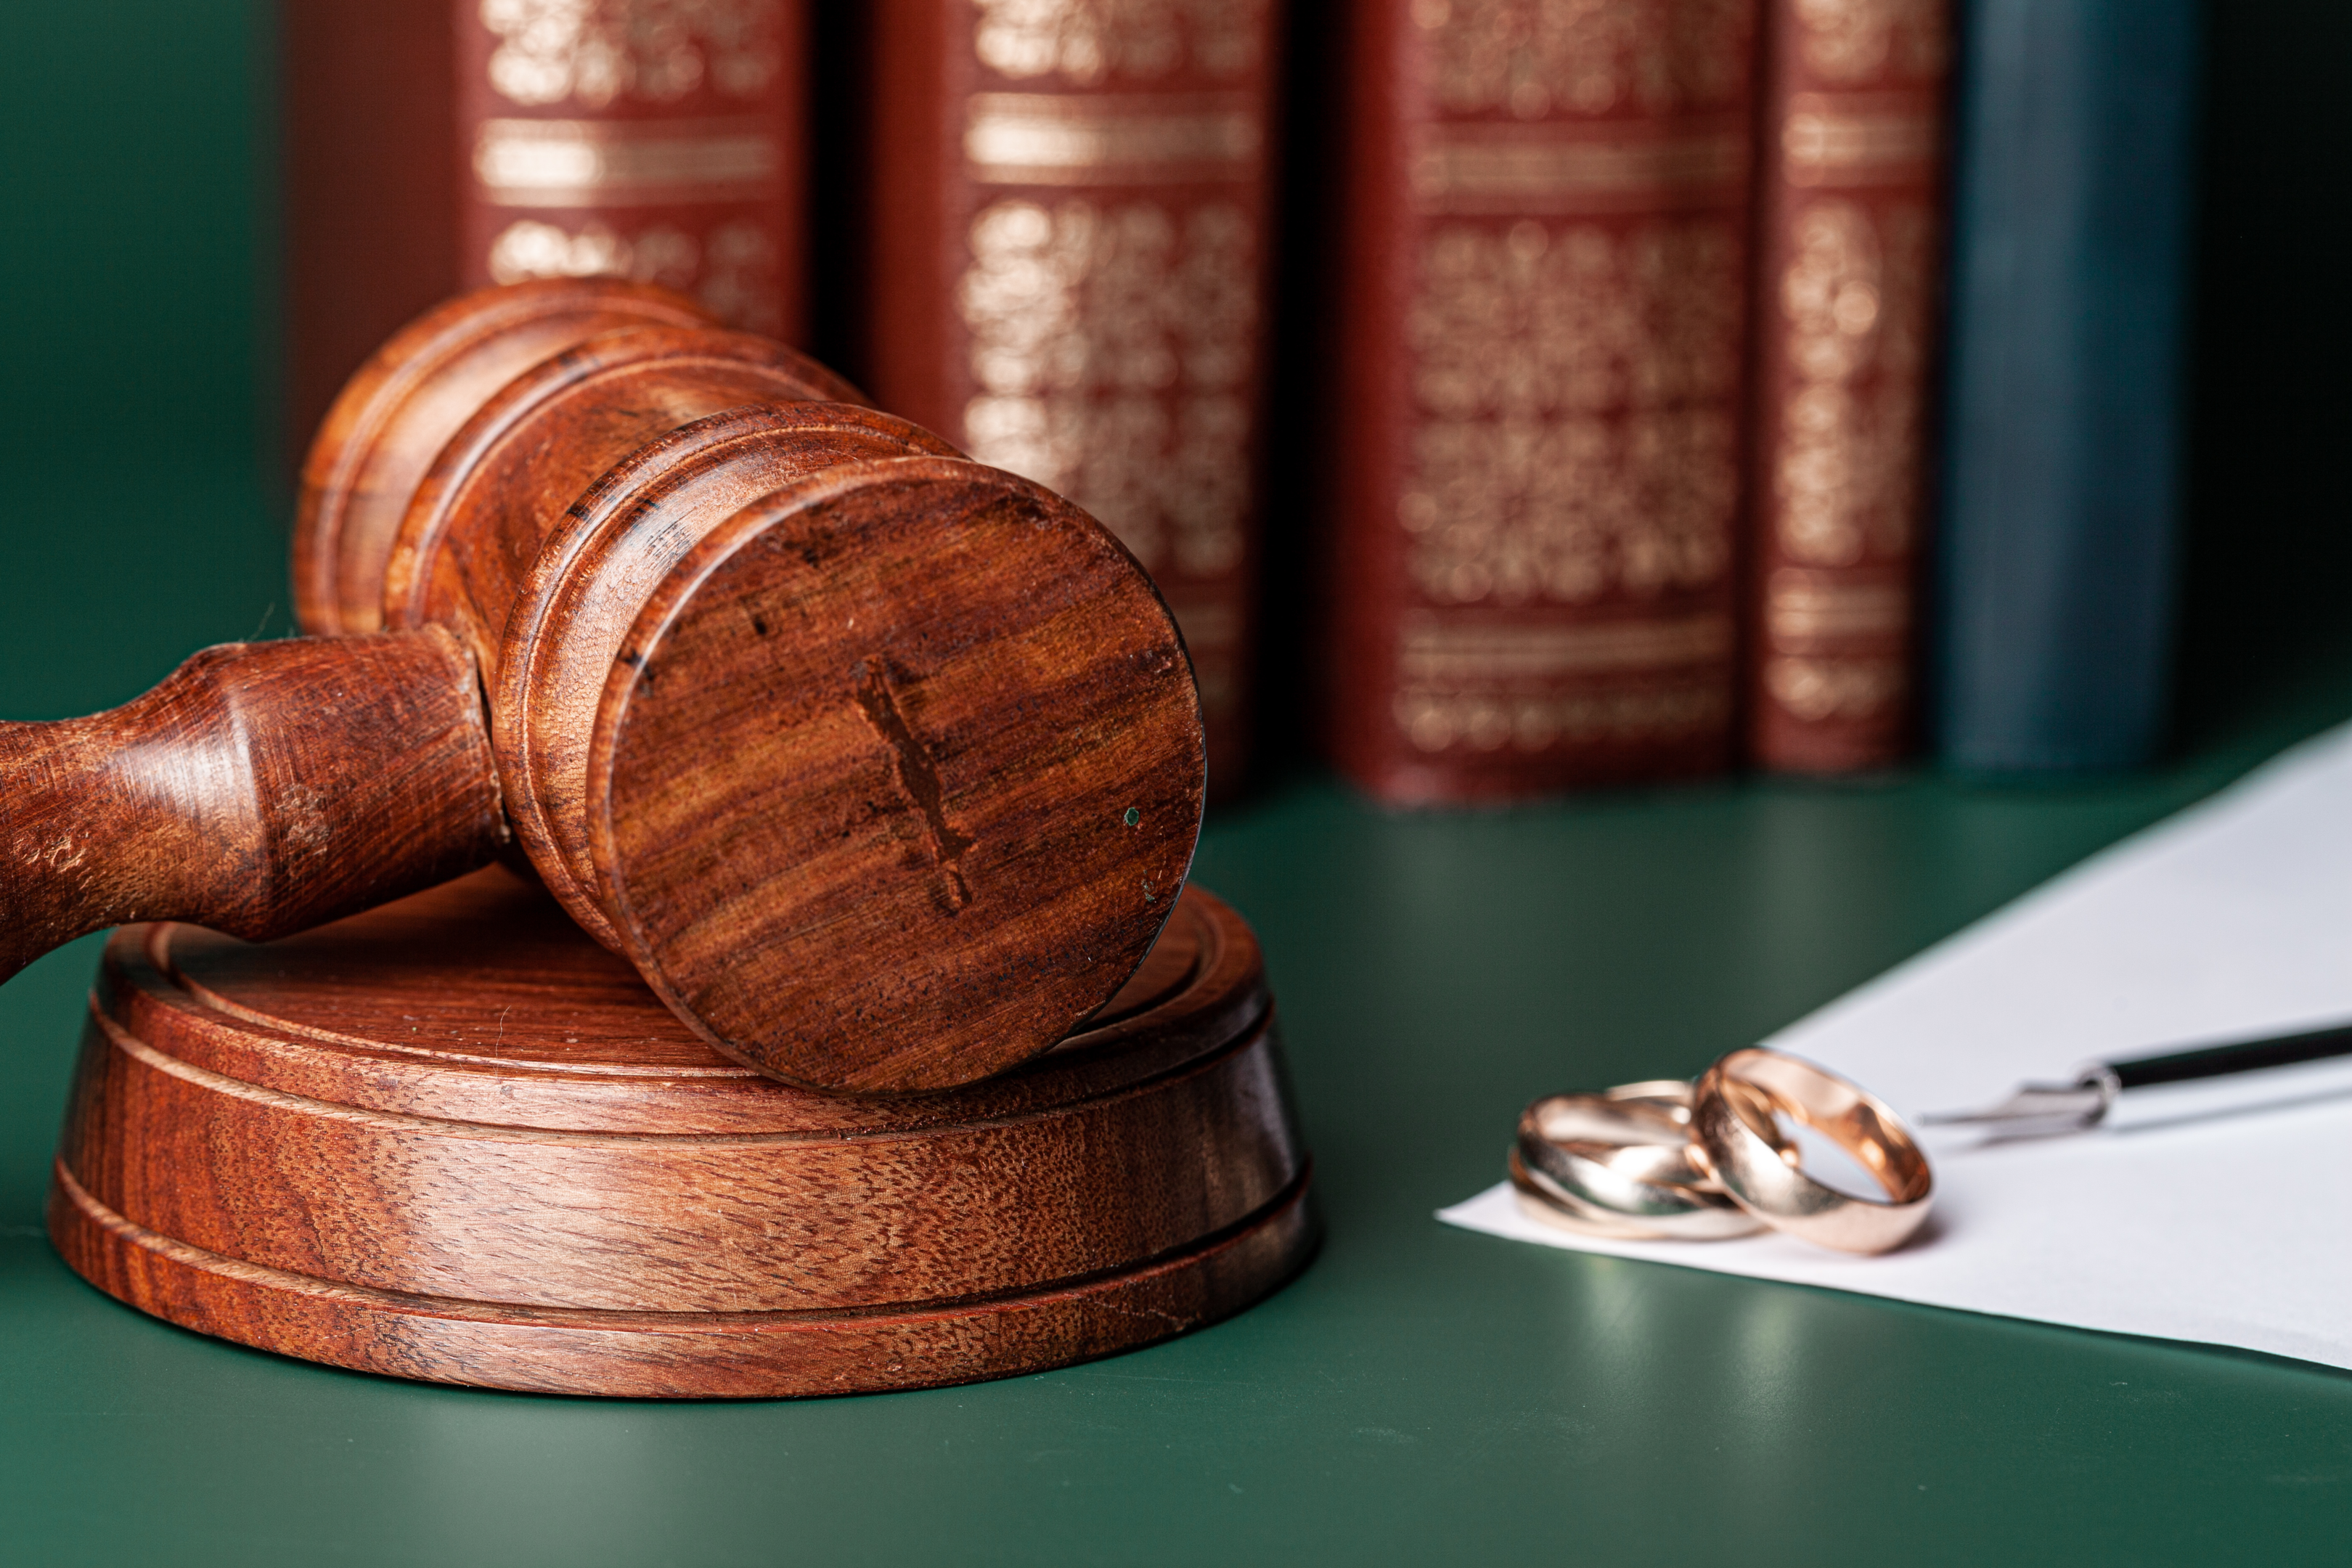 A law gavel and wedding rings on a table depict the intertwining of love and law, underscoring the legal considerations awaiting unmarried couples in California, a state where legal provisions can sometimes offer protections akin to those in marriage. It's a subtle reminder to understand your rights and safeguard your partnership.